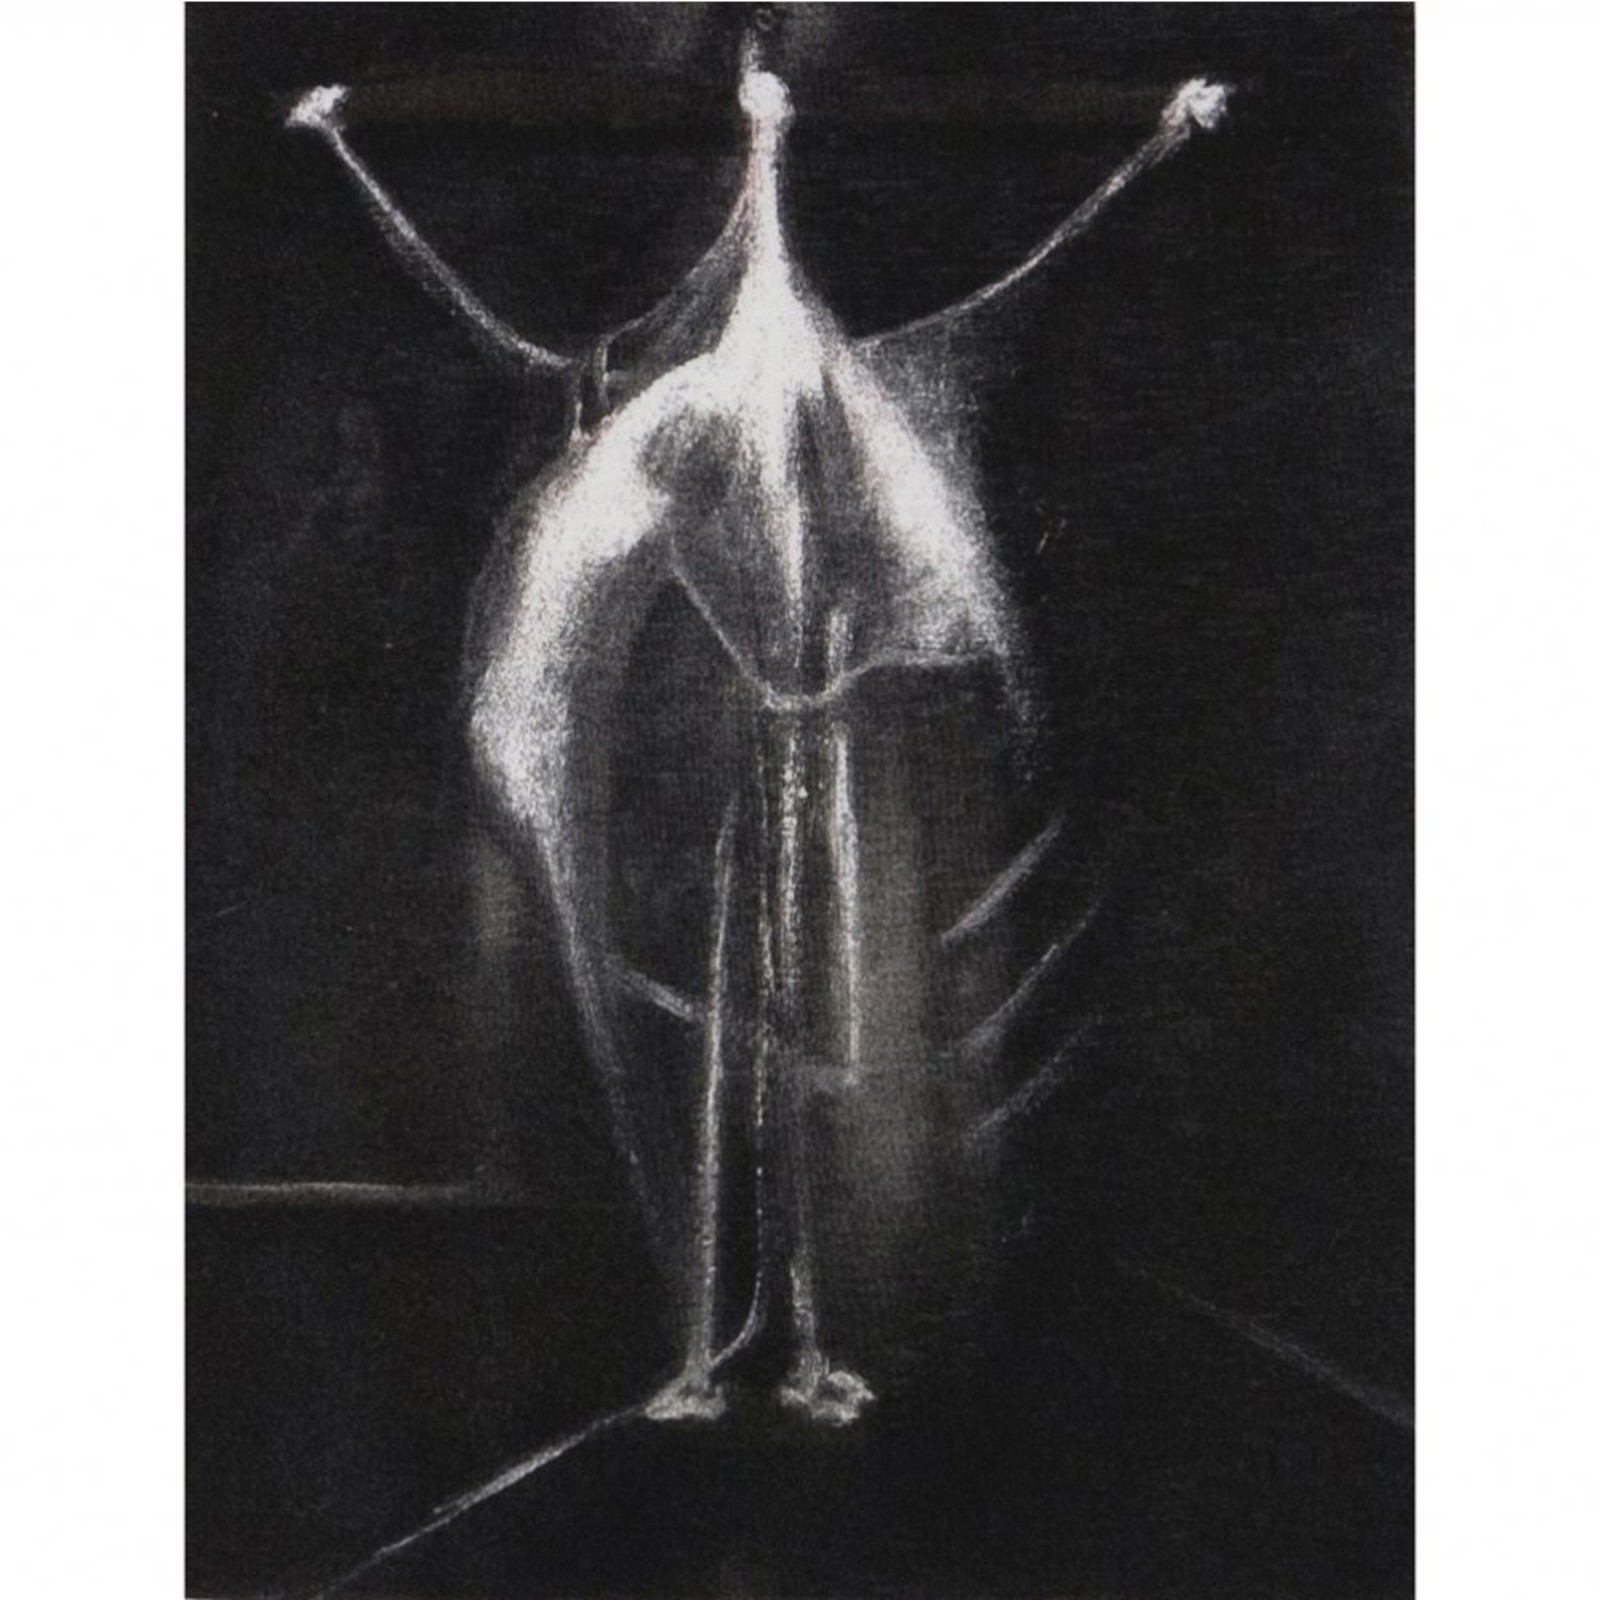 Francis Bacon. Crucifixion. 1933. Oil on canvas. 62 x 48.5 cm. Private collection